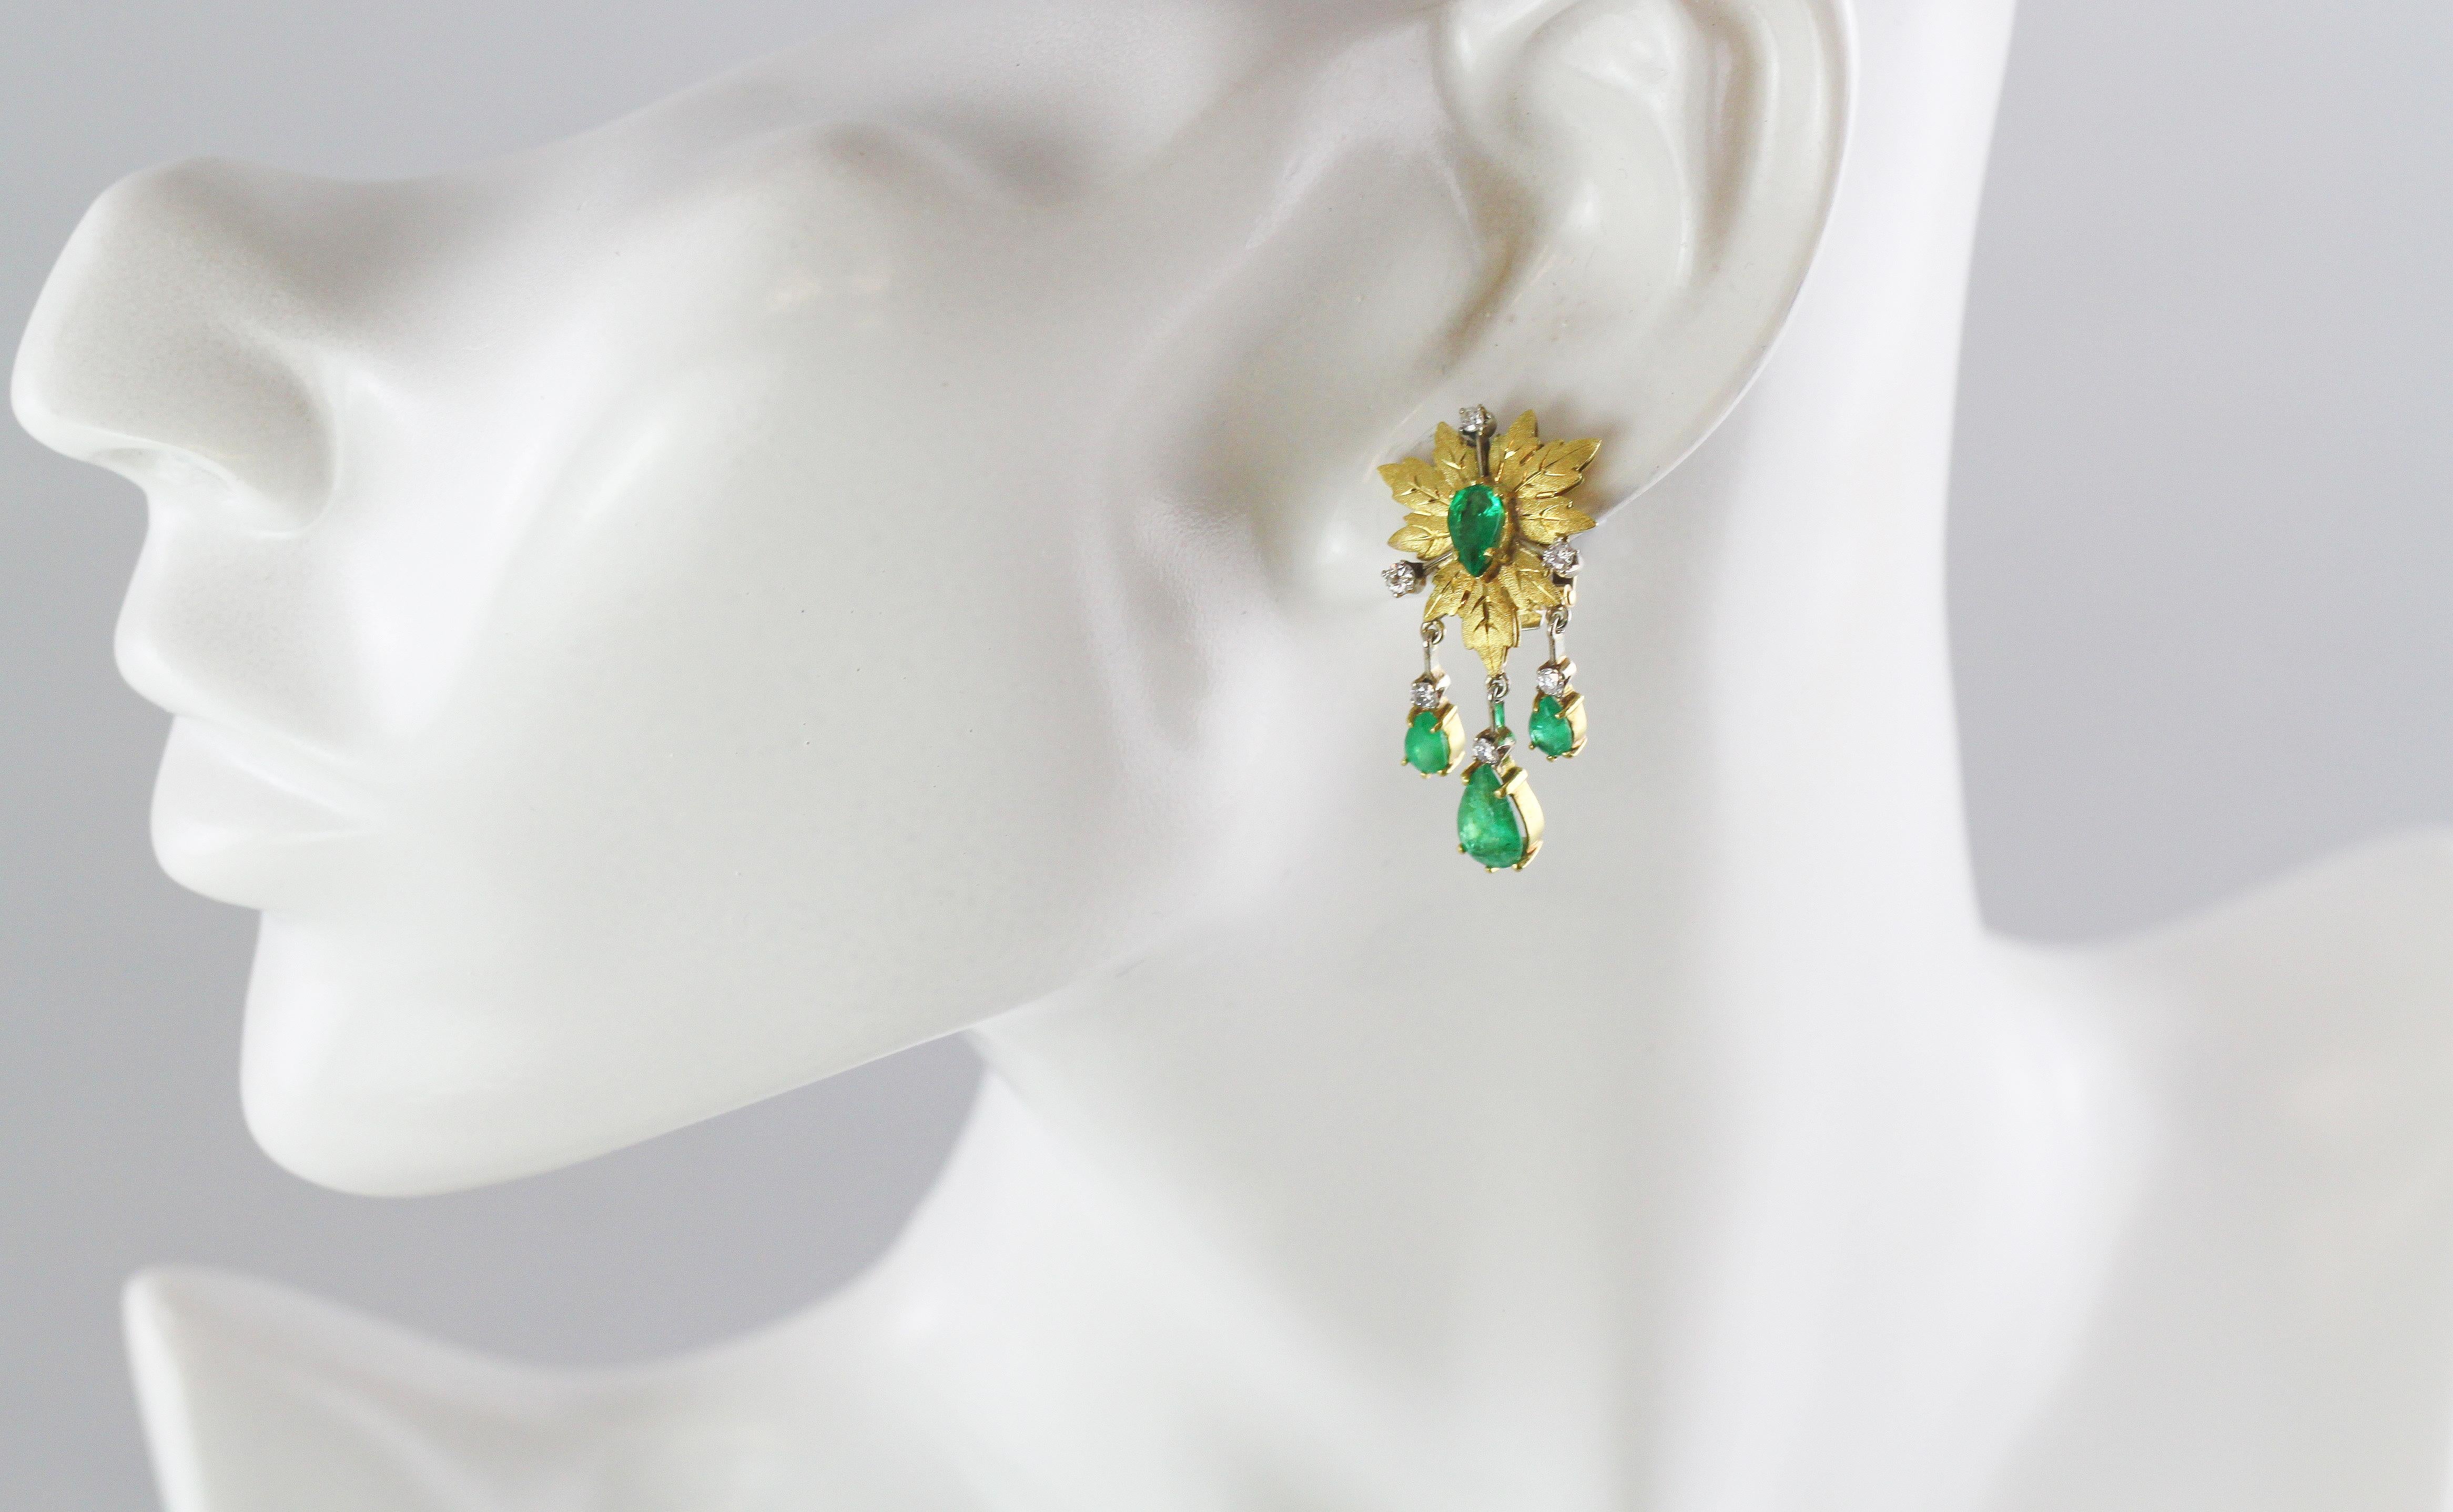 Mario Buccellati 18kt yellow gold clip-on earrings with emeralds and diamonds.
Designer: Mario Buccellati
Made in Italy, Circa 1950-1970.
Fully hallmarked.

Dimension - 
Size : 3.5 x 1.7 x 0.8 cm
Weight : 12 grams

Emeralds - 
Cut : Pear
Quantity :